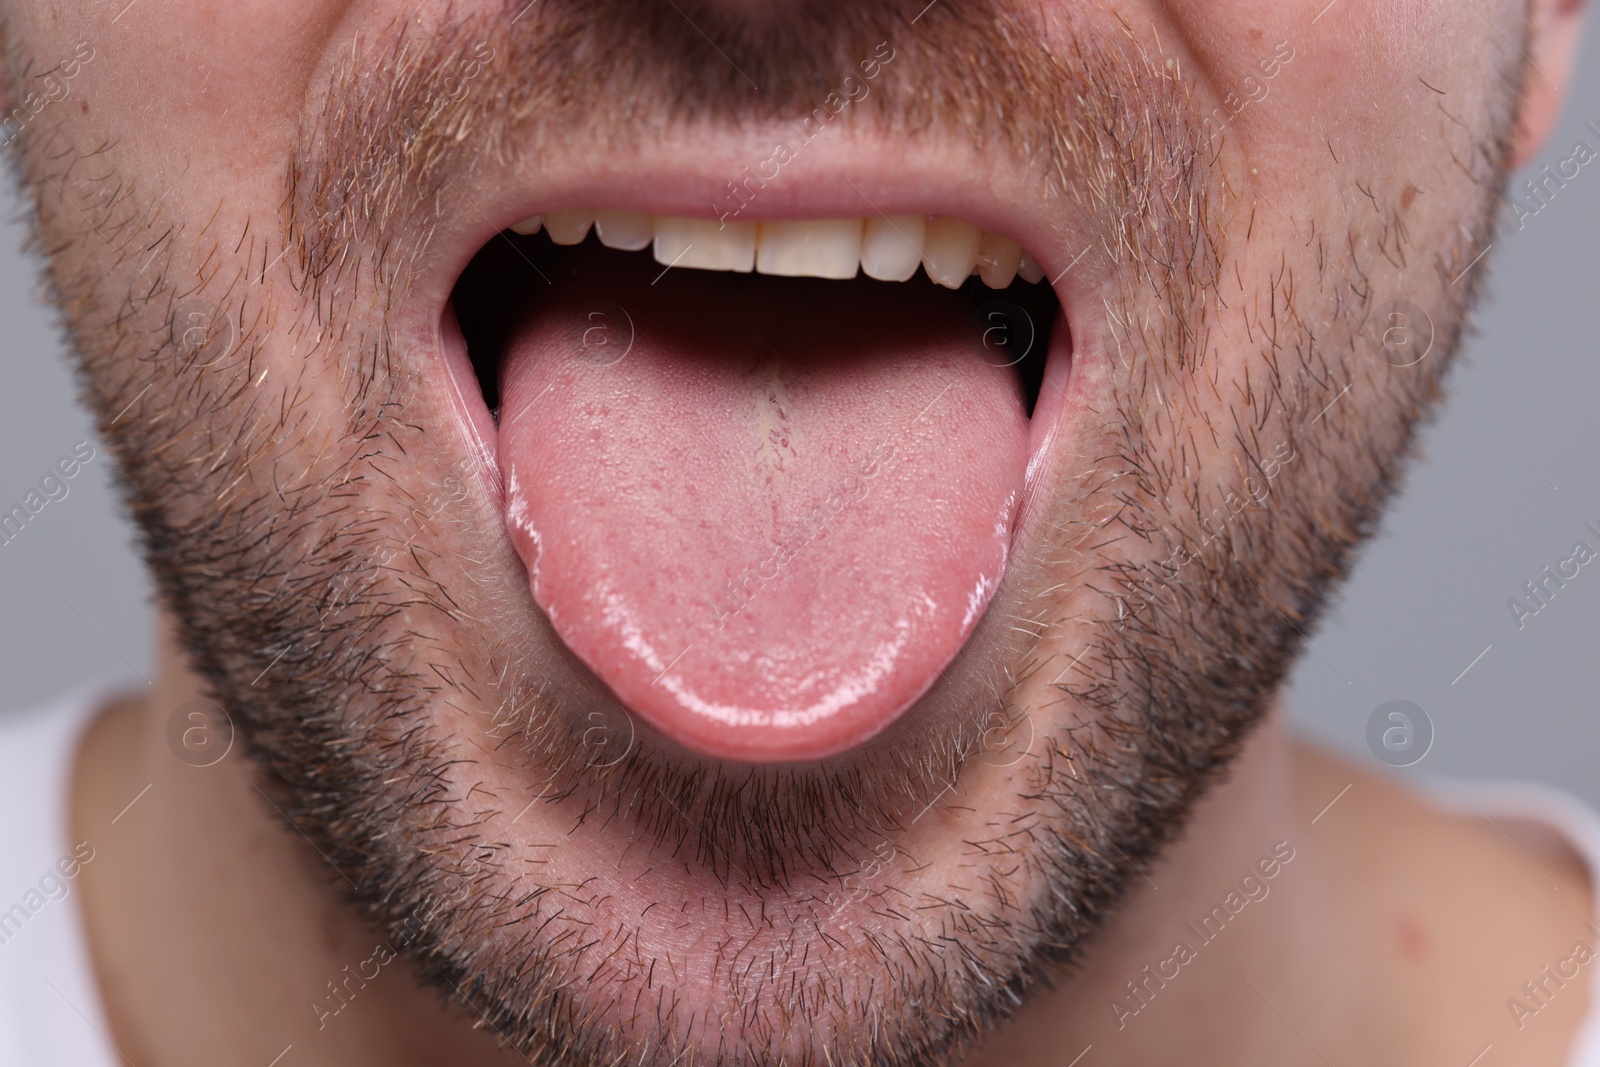 Photo of Closeup view of man showing his tongue on grey background